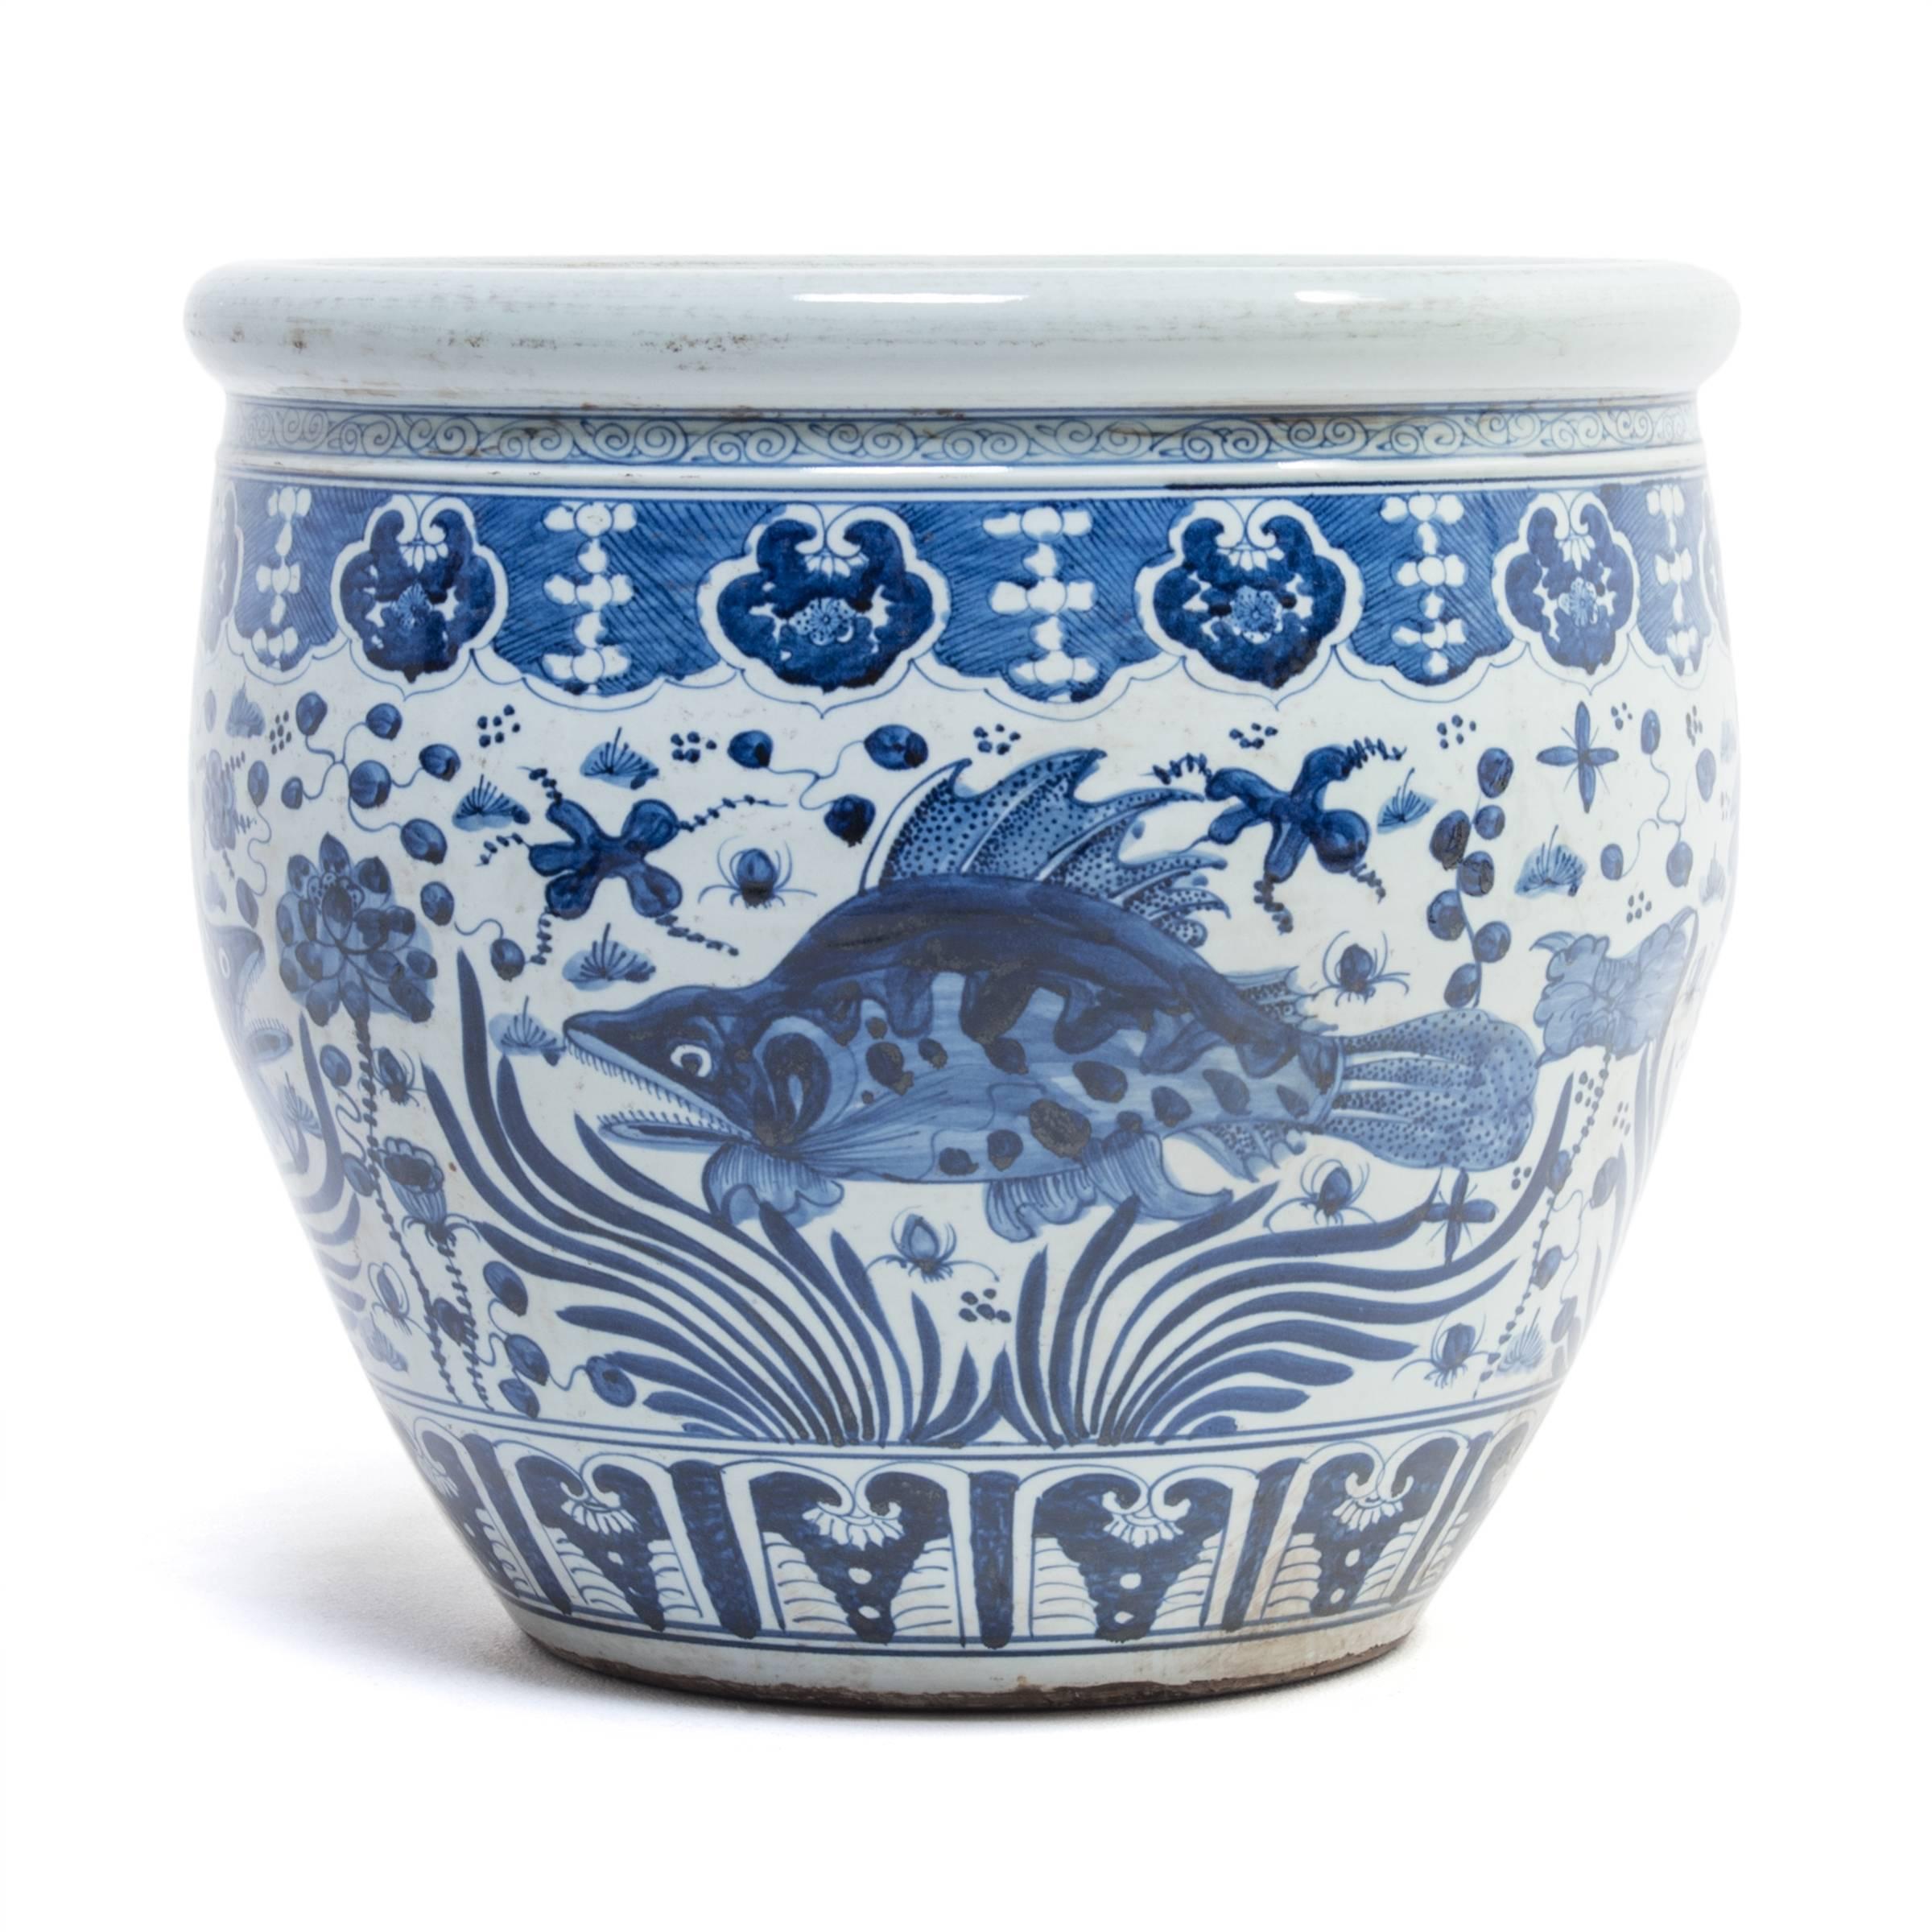 This grand scale, blue and white porcelain bowl is painted by hand with fish and flora from the sea, representing blessings for wealth and life as content as fish in water. Chinese blue and white ceramics have inspired ceramists worldwide since